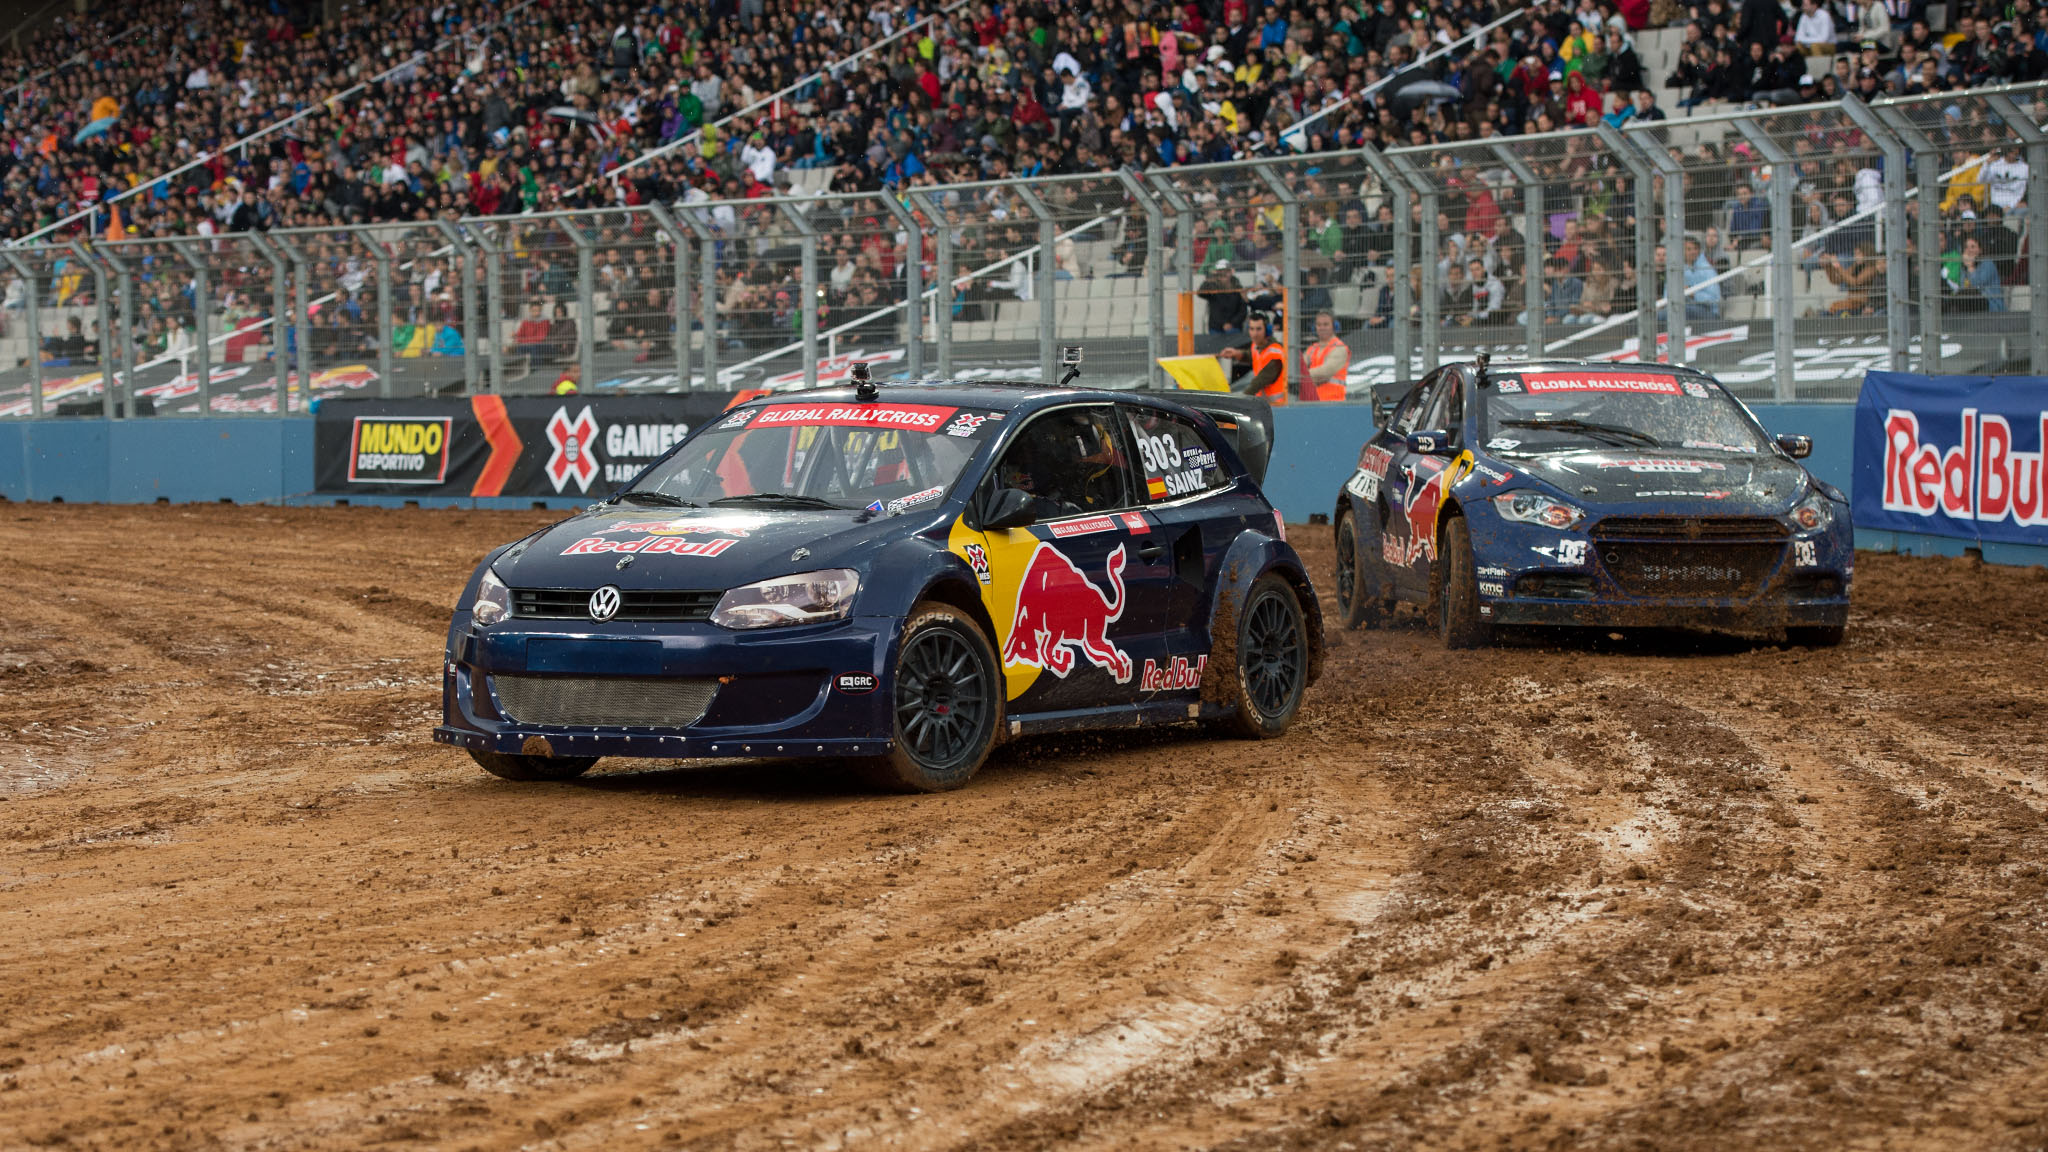 RallyCross practice was held in the mud before organizers canceled the race.